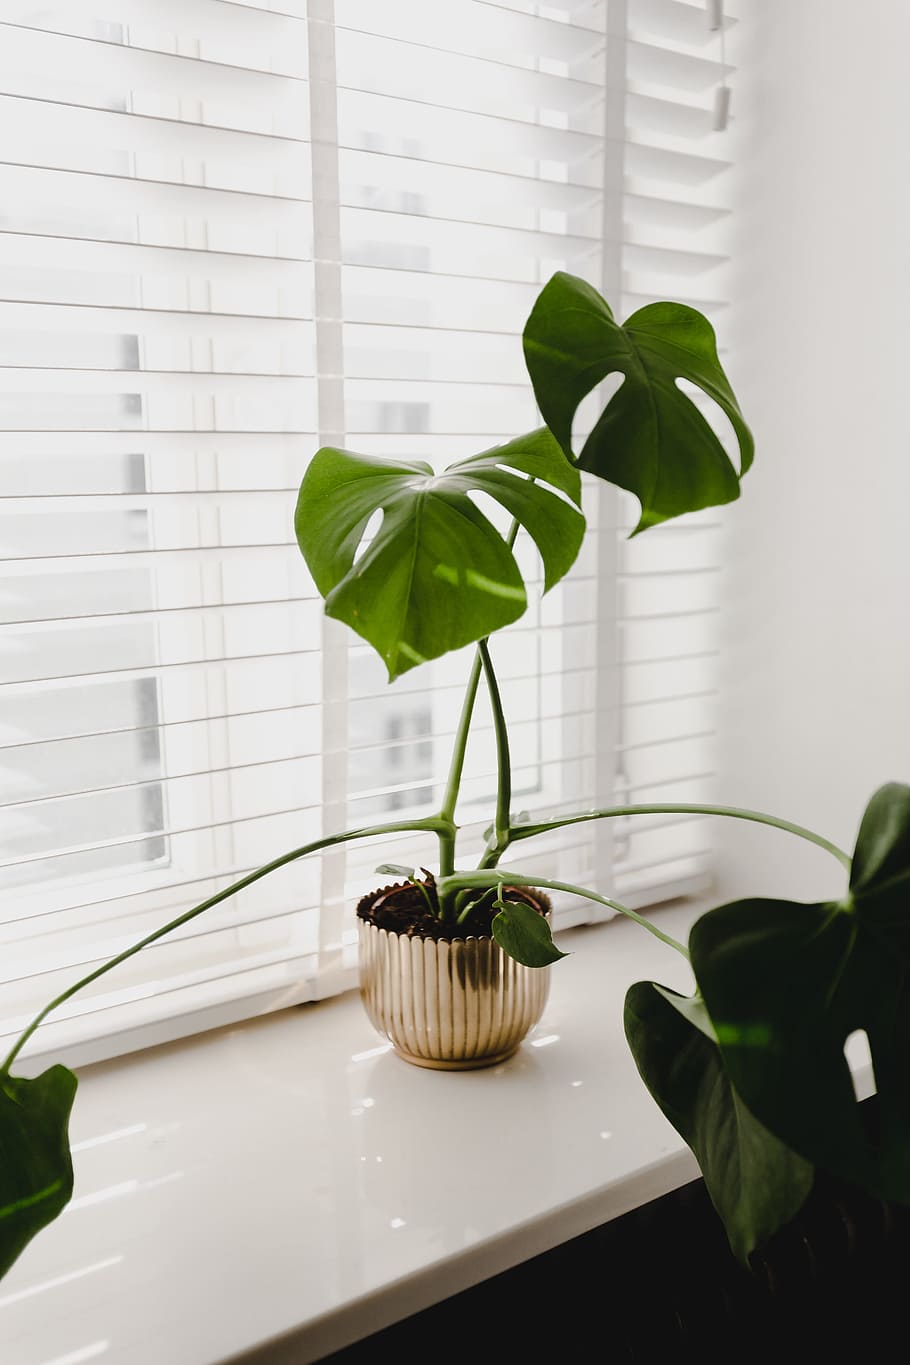 Monstera in the gold pot, flora, green, leaf, plant, window, blinds